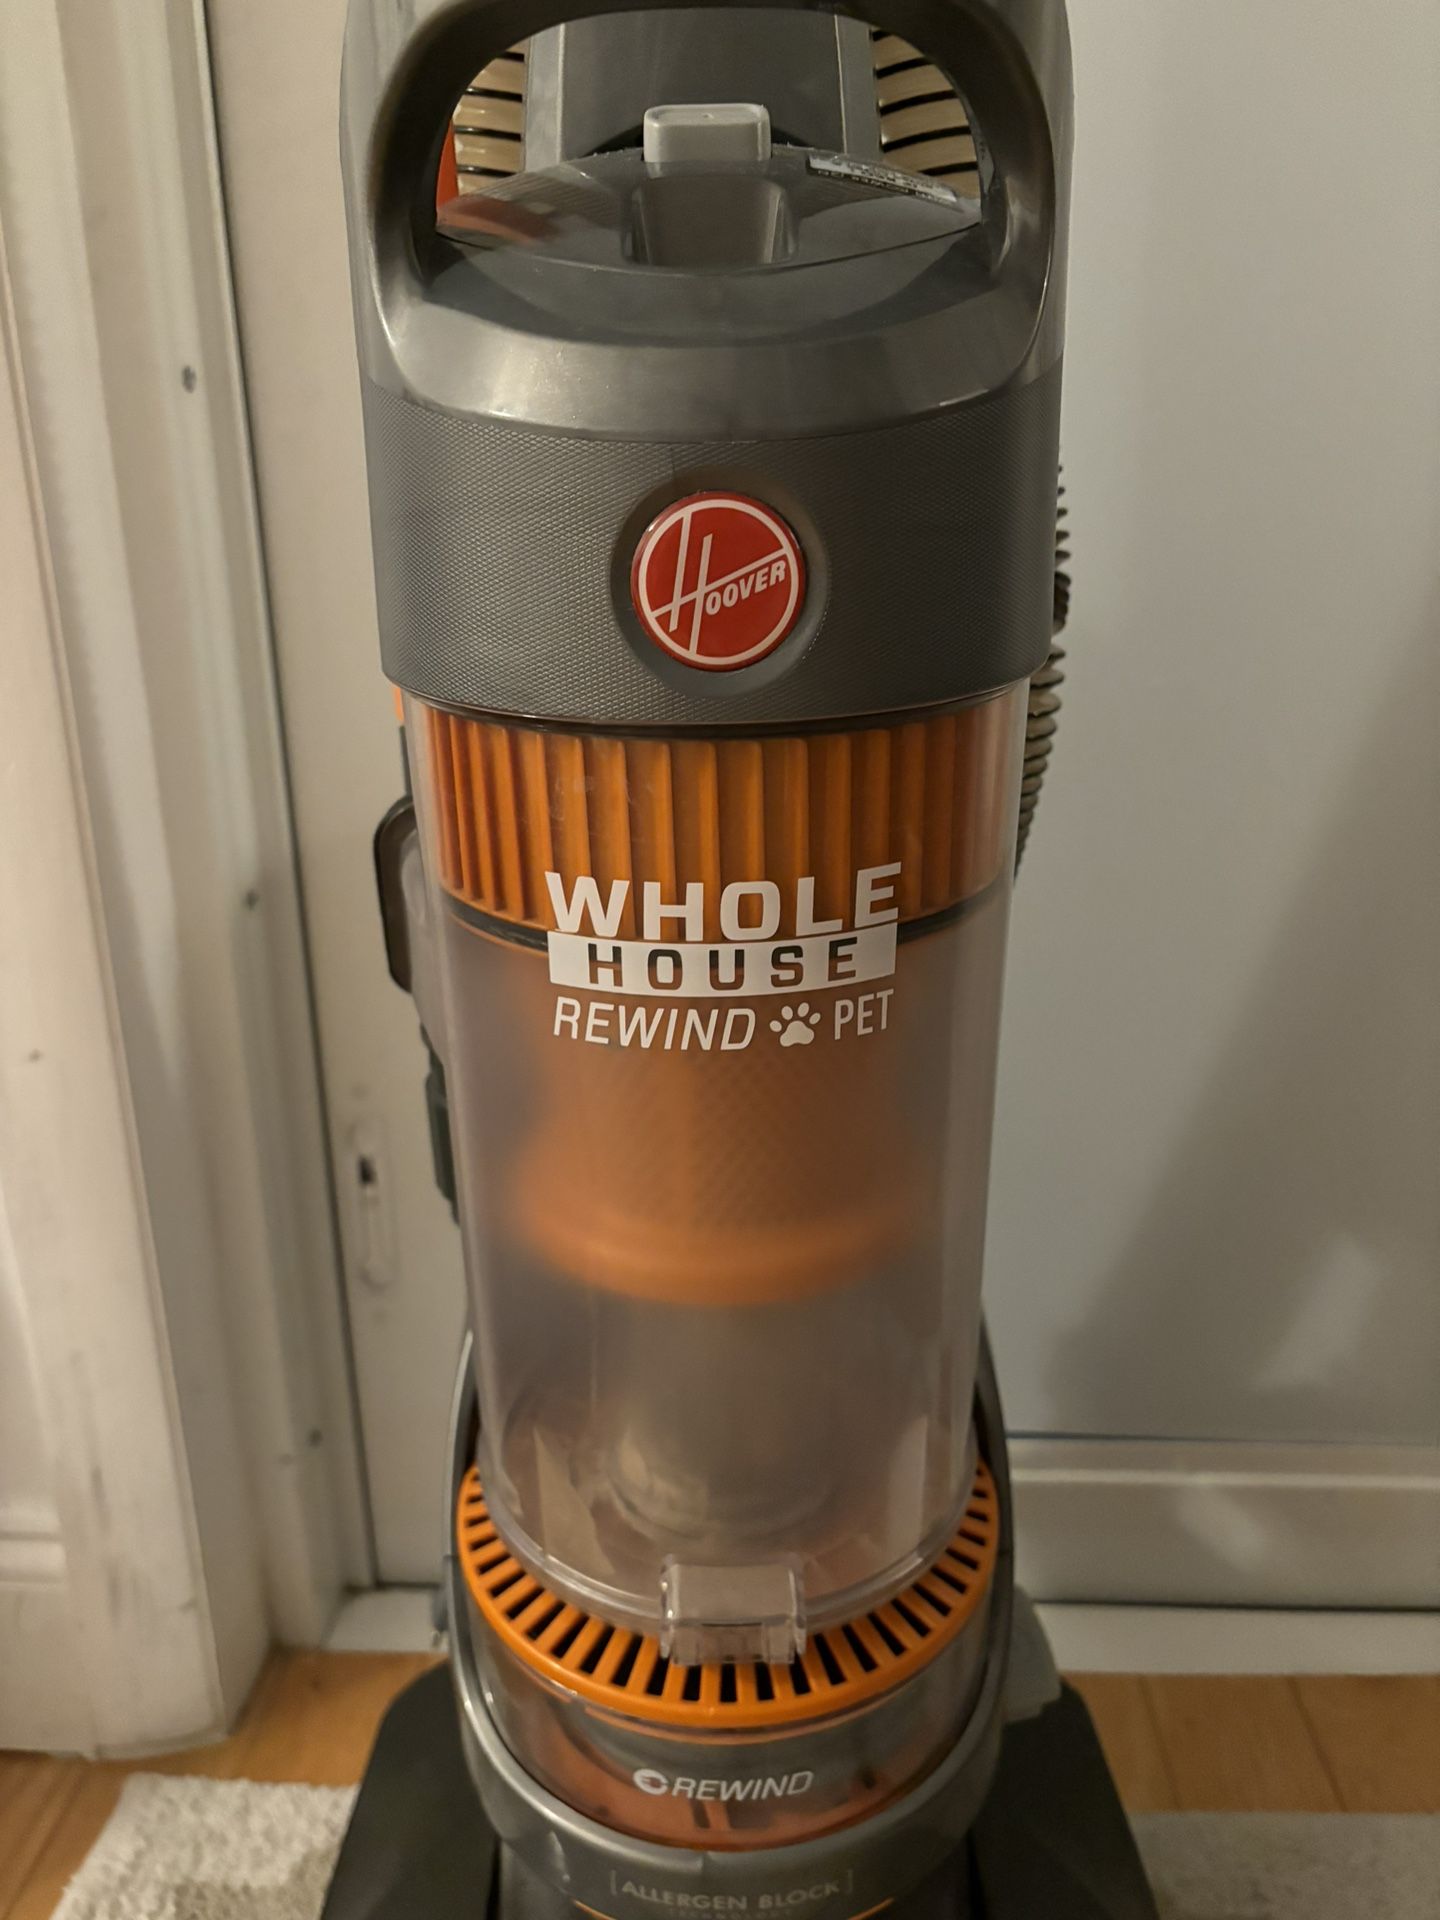 Hoover Wind Tunnel Whole House Cord Rewind Bagless Pet Upright Vacuum